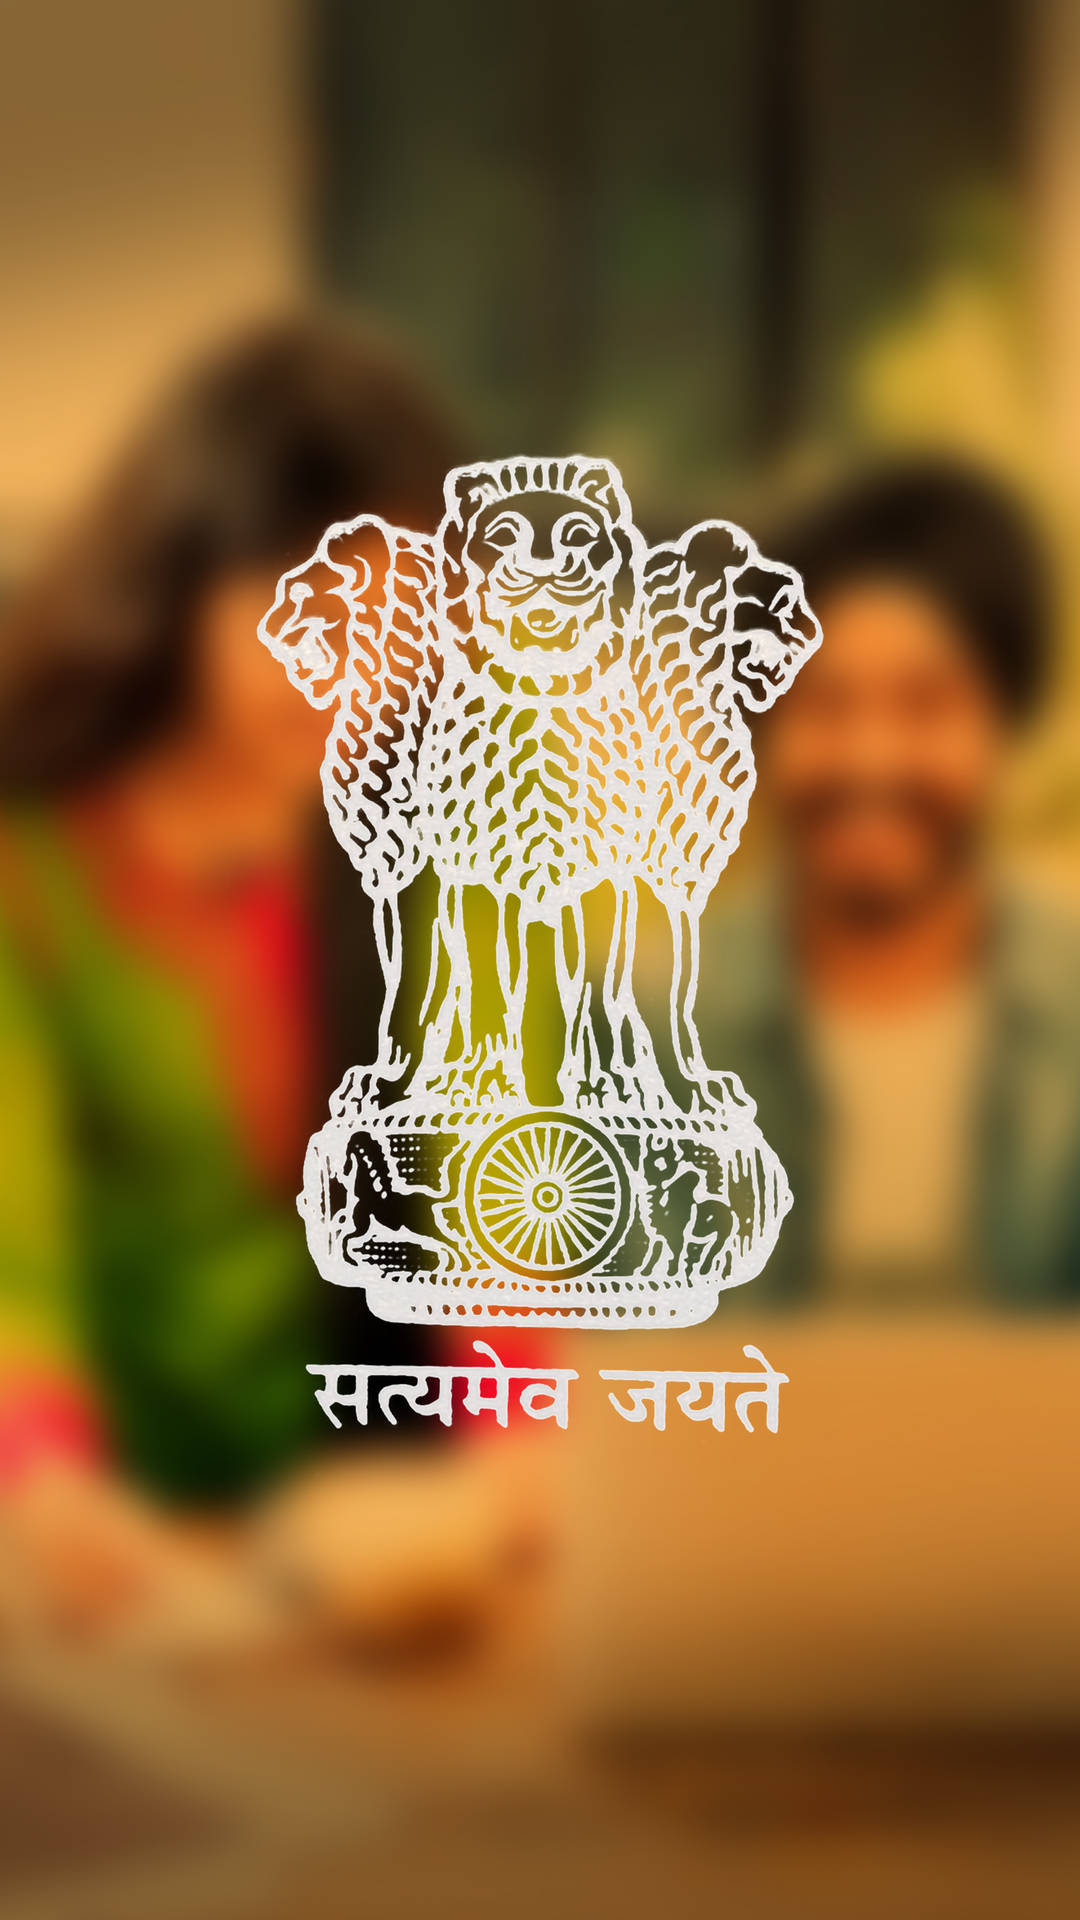 Free Upsc Wallpaper Downloads, [100+] Upsc Wallpapers for FREE | Wallpapers .com